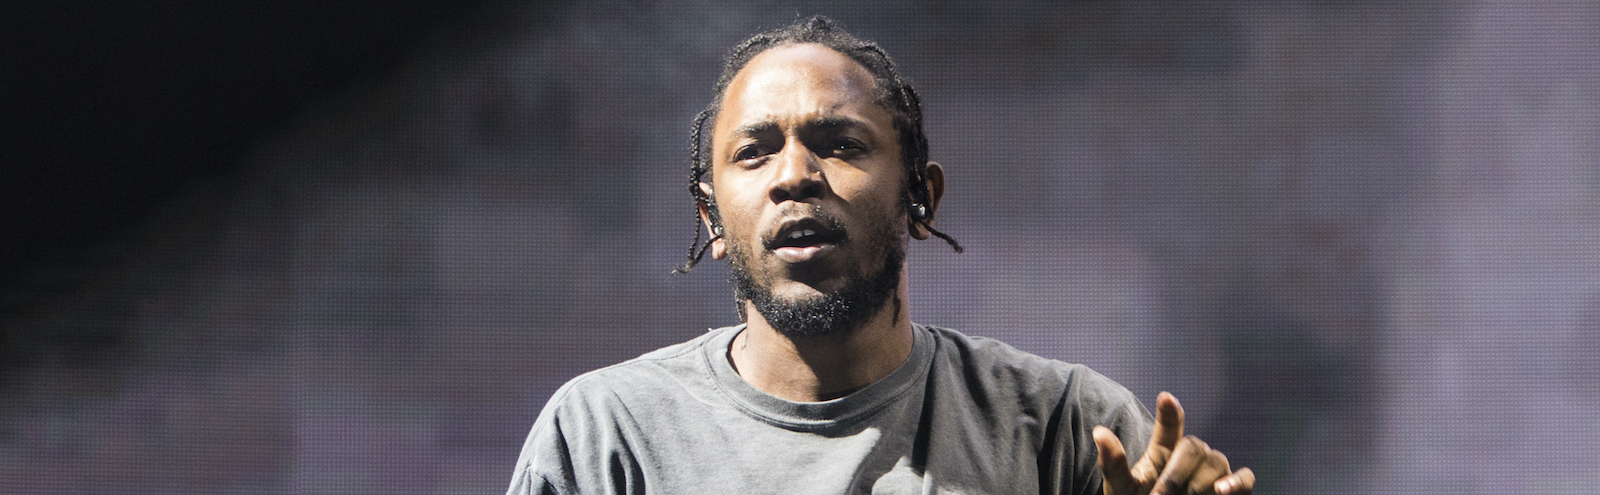 What is pgLang? Kendrick Lamar teases mysterious new project